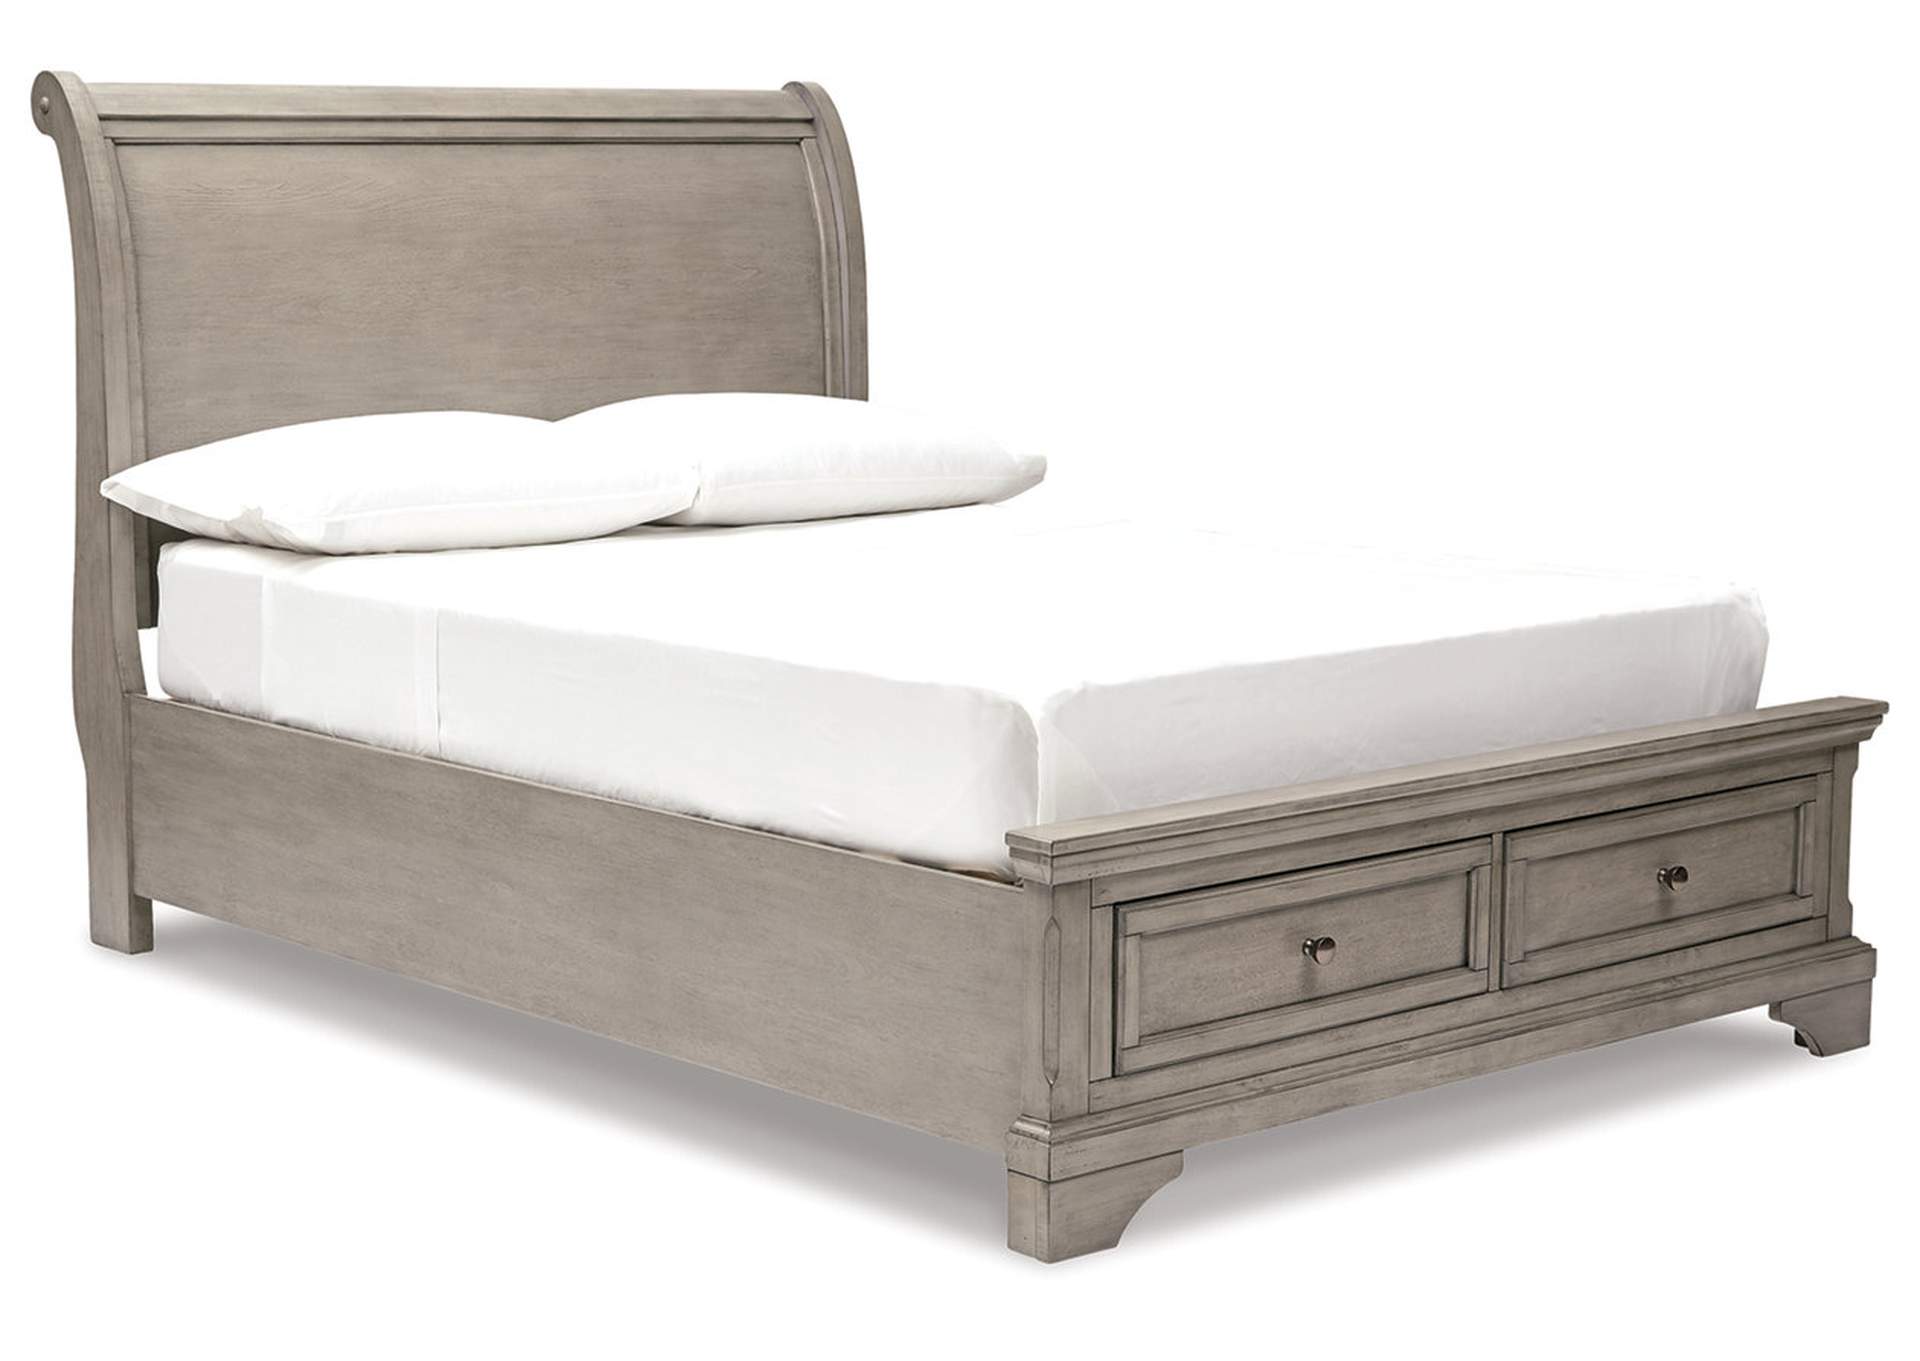 Lettner Full Sleigh Bed with Mirrored Dresser, Chest and Nightstand,Signature Design By Ashley